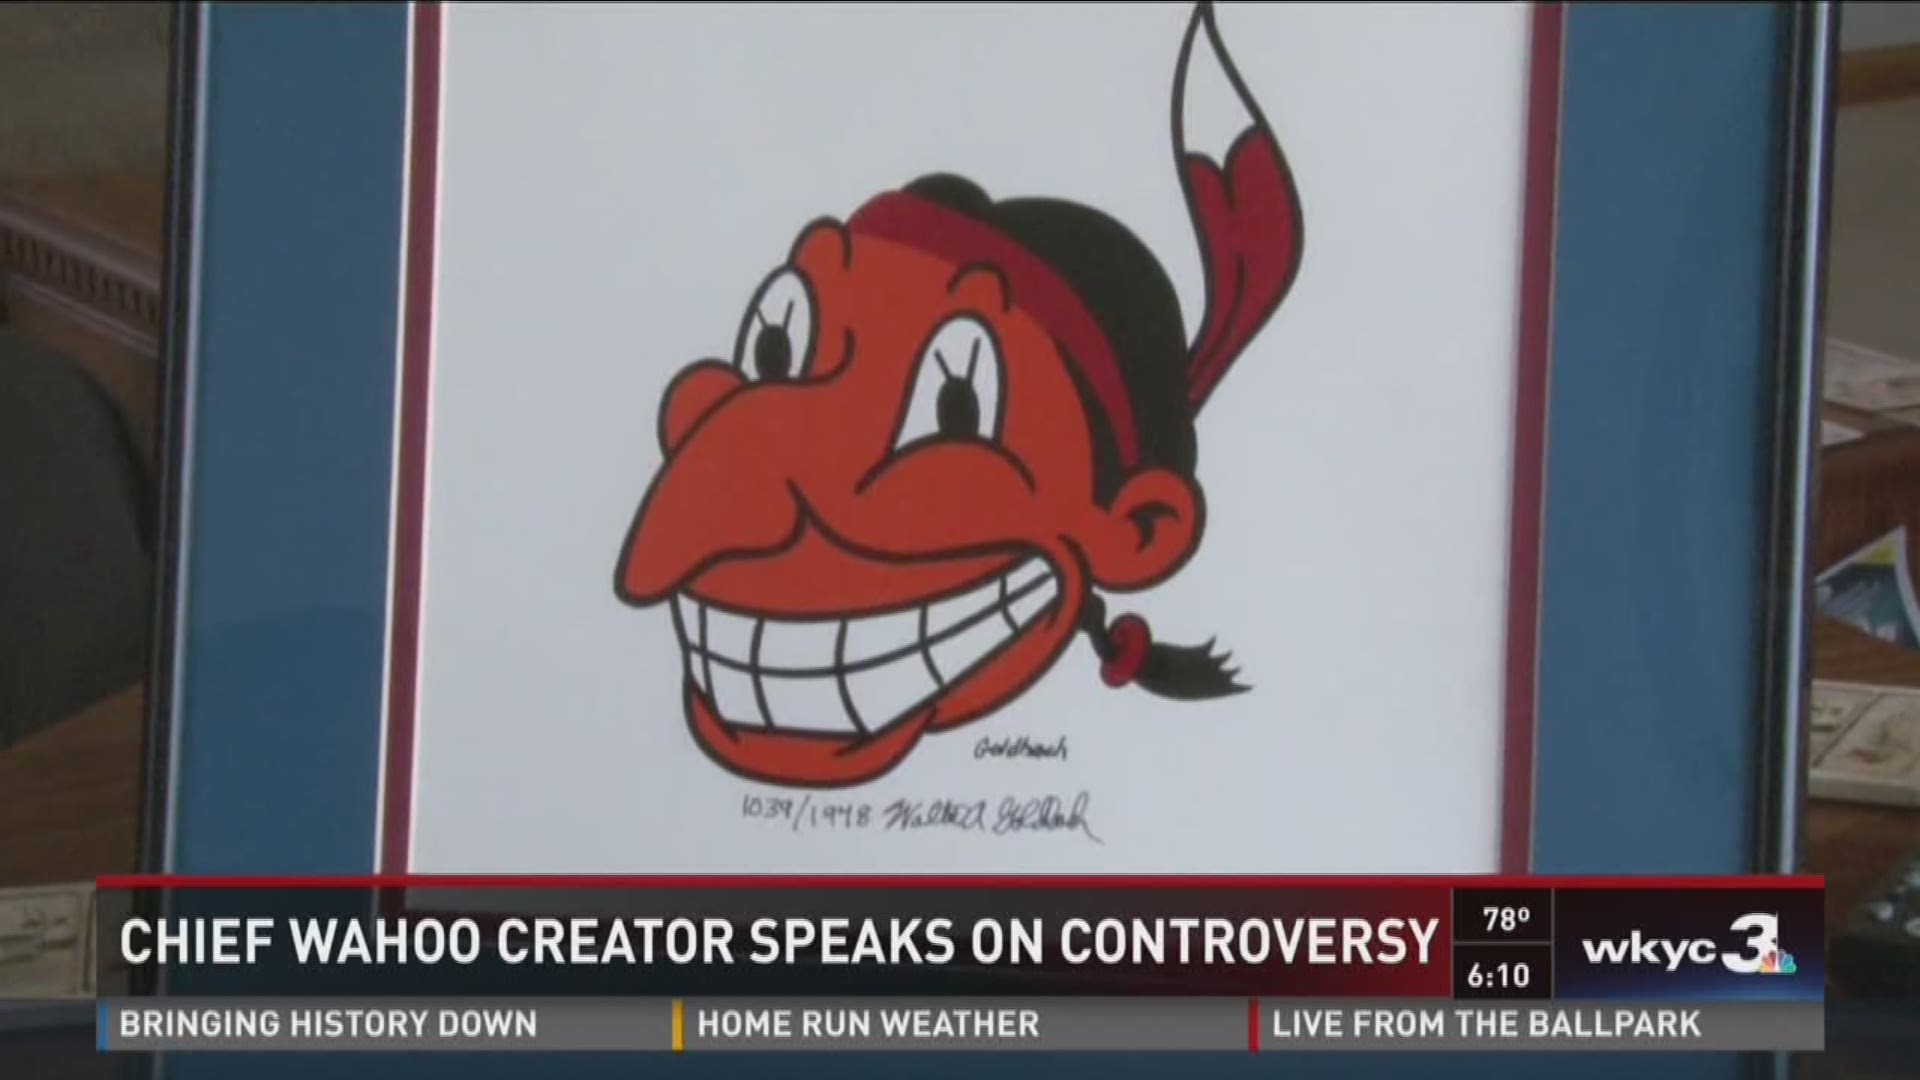 Chief Wahoo creator speaks on controversy